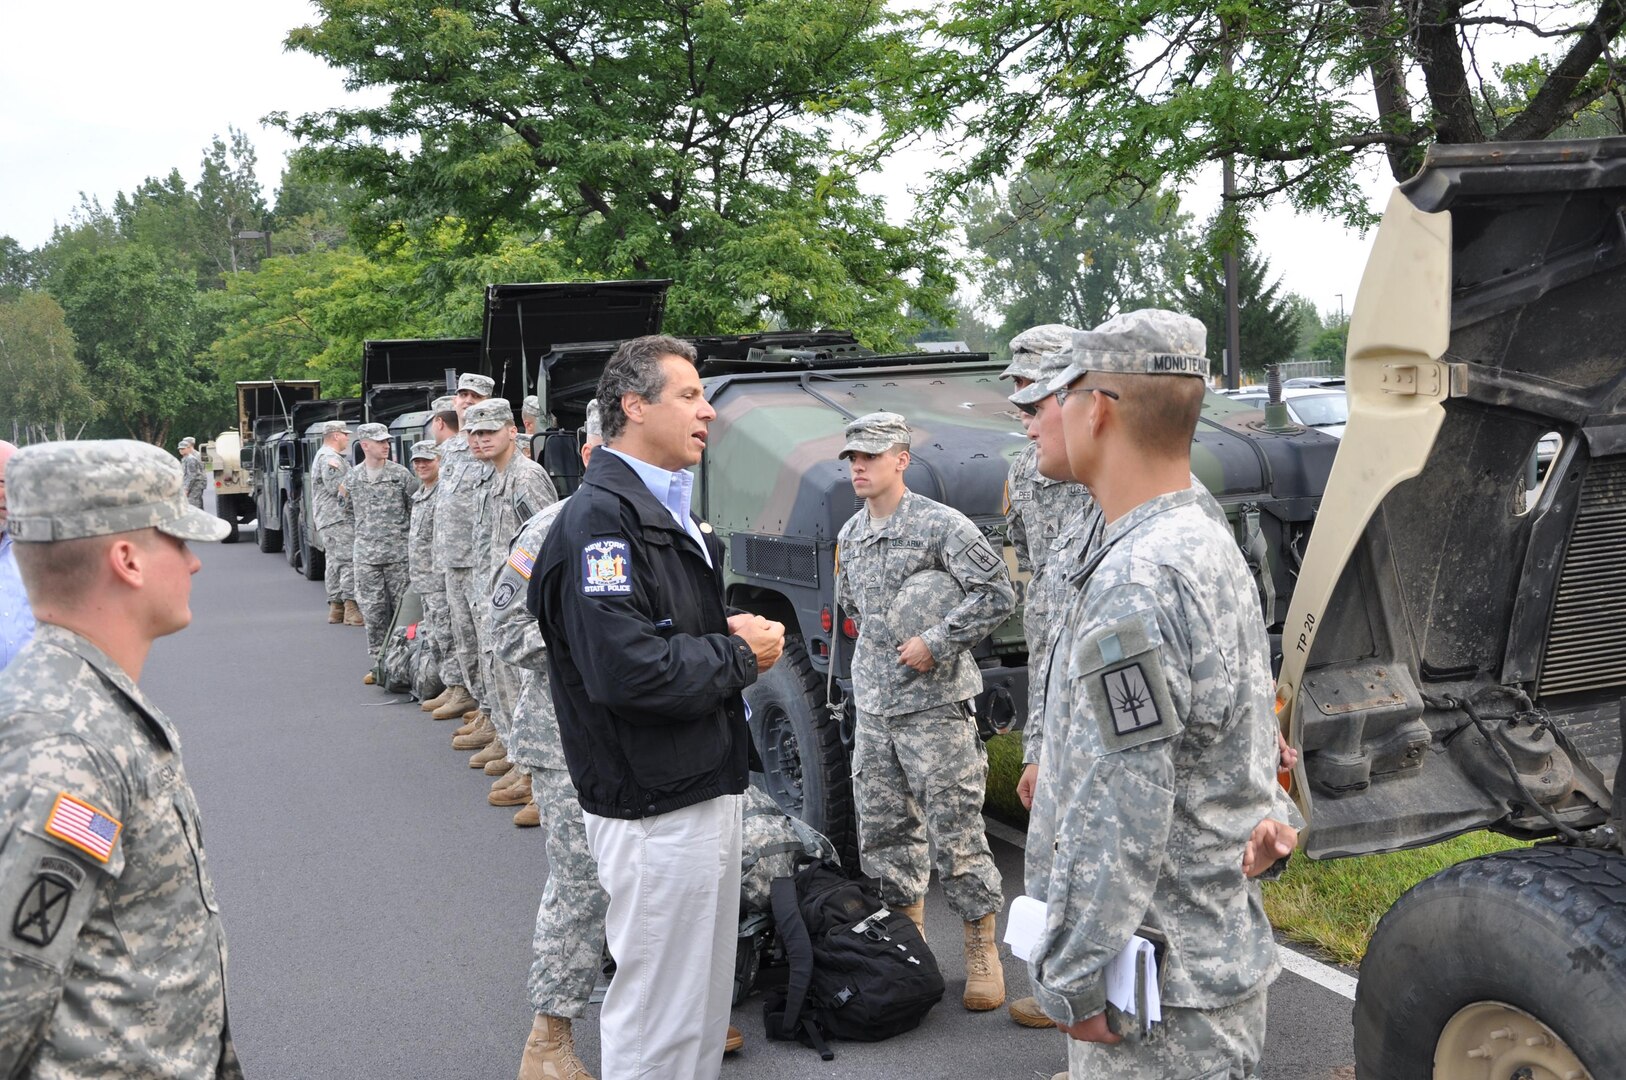 New York Gov. Andrew M. Cuomo speaks with members of the 206th Military
Police Company prior to their deployment on Aug. 27, 2011, for Hurricane
Irene response operations.